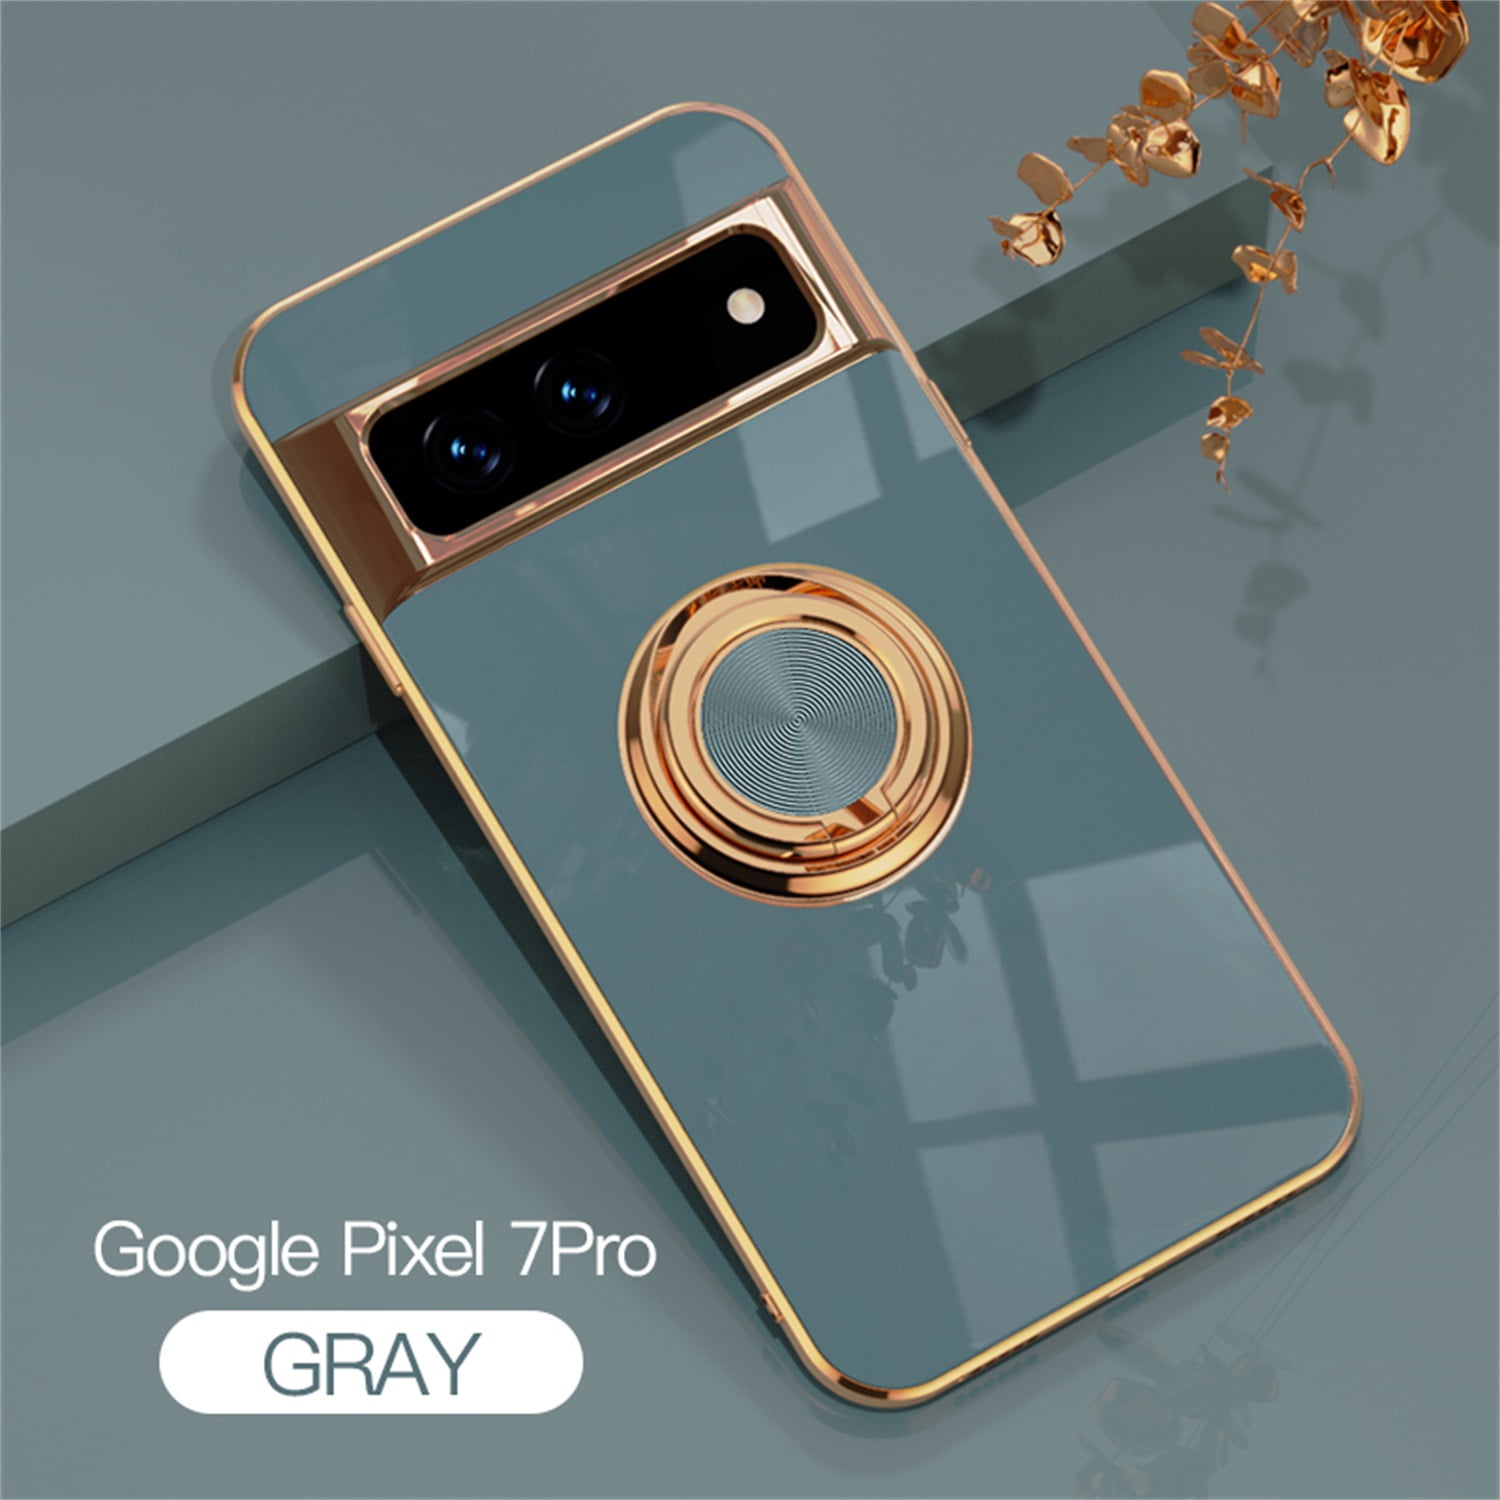  ZBCLV for Google Pixel 7 Pro (not fit Pixel 7) Pretty Case for  Women Girls Luxury Box Trunk Design Cute Gold Flowers Square Soft Cover  with Finger Ring Grip Kickstand Phone